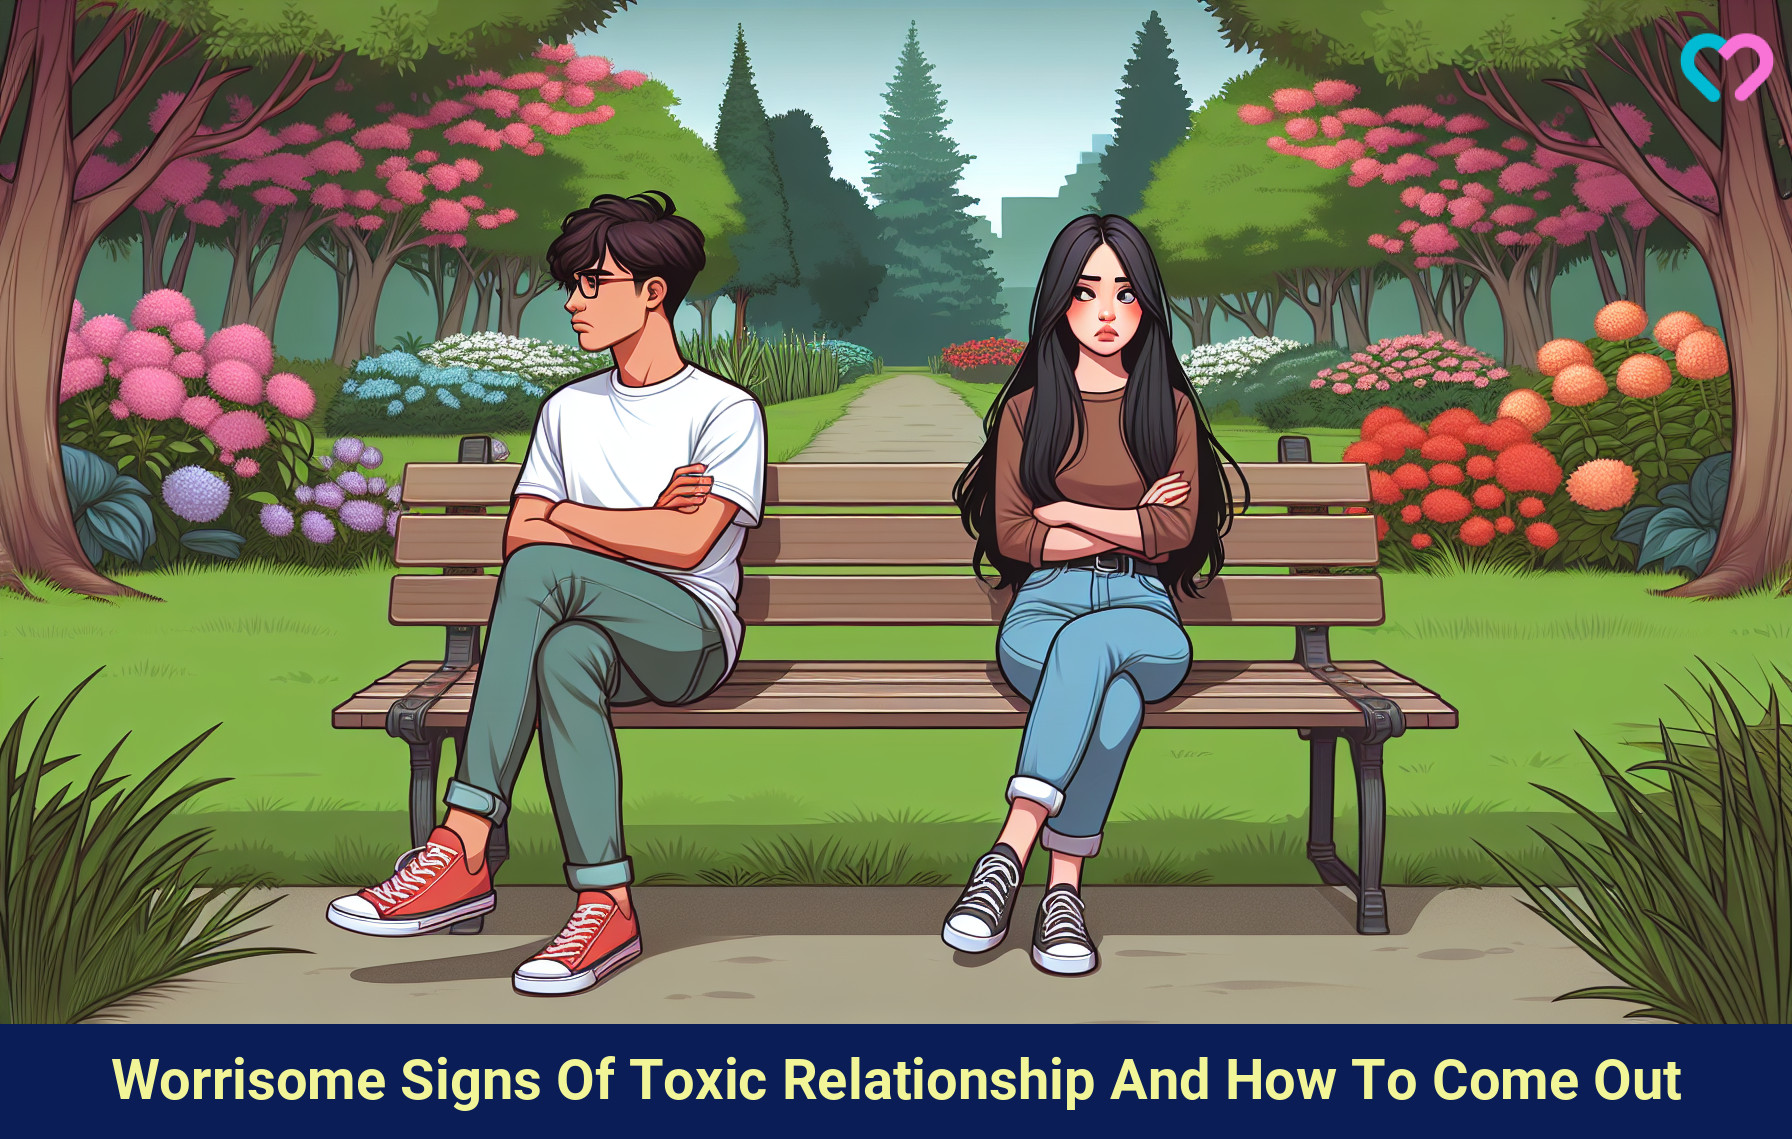 signs of toxic relationship_illustration